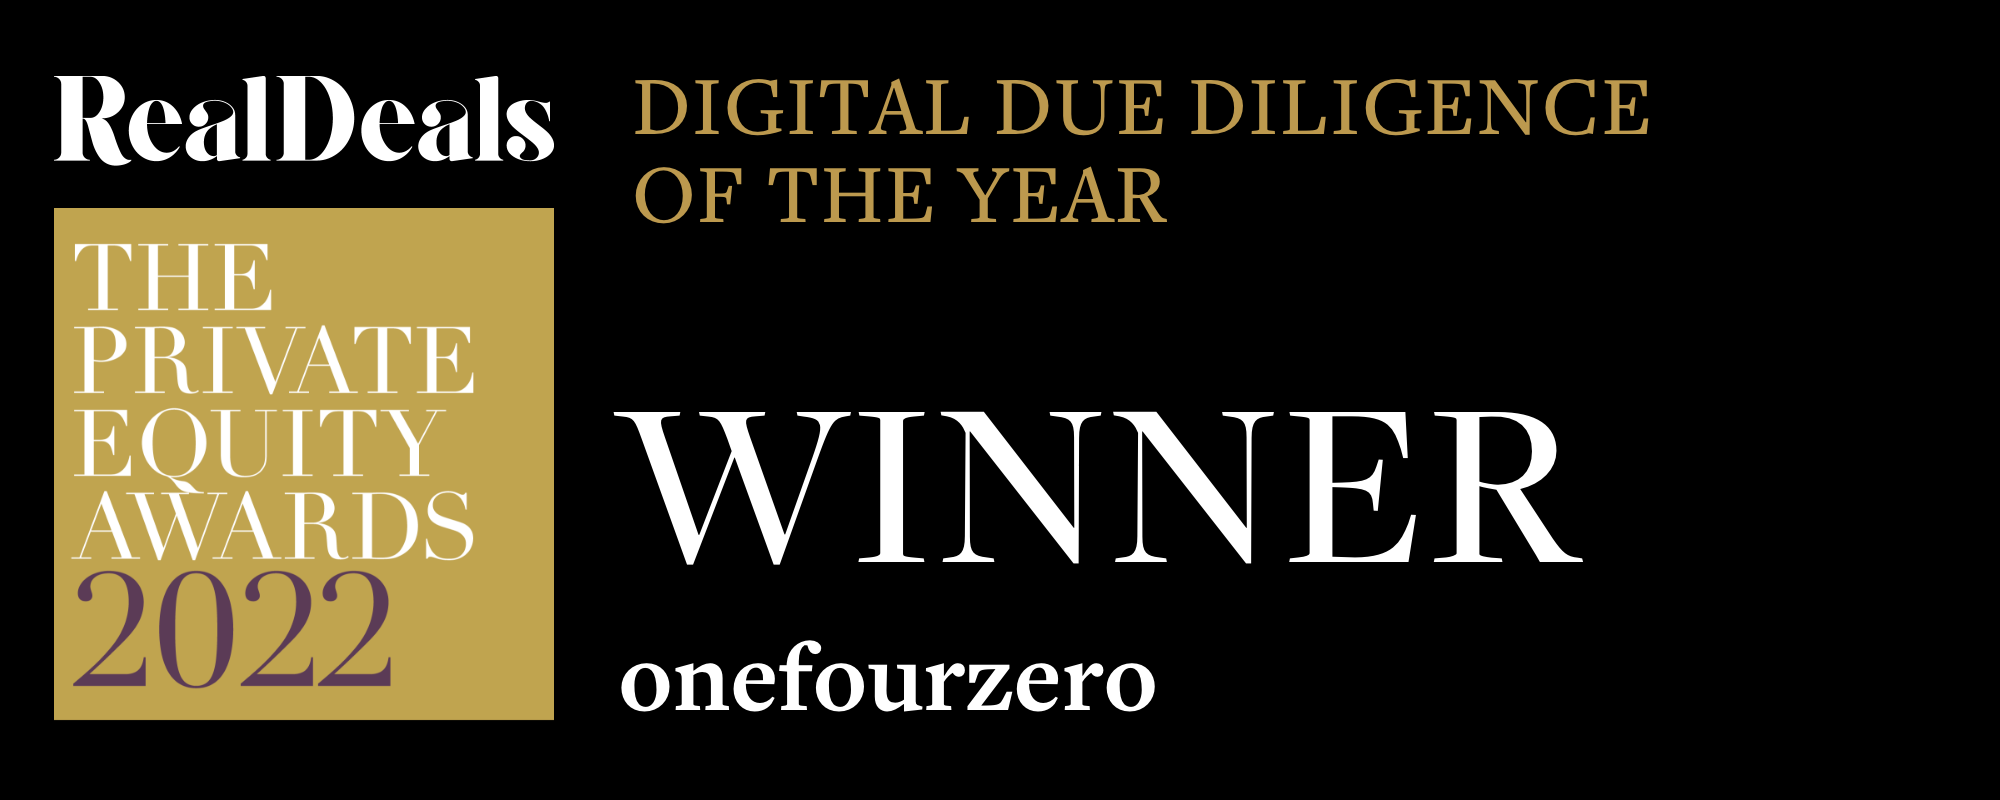 onefourzero wins at The Private Equity Awards 2022